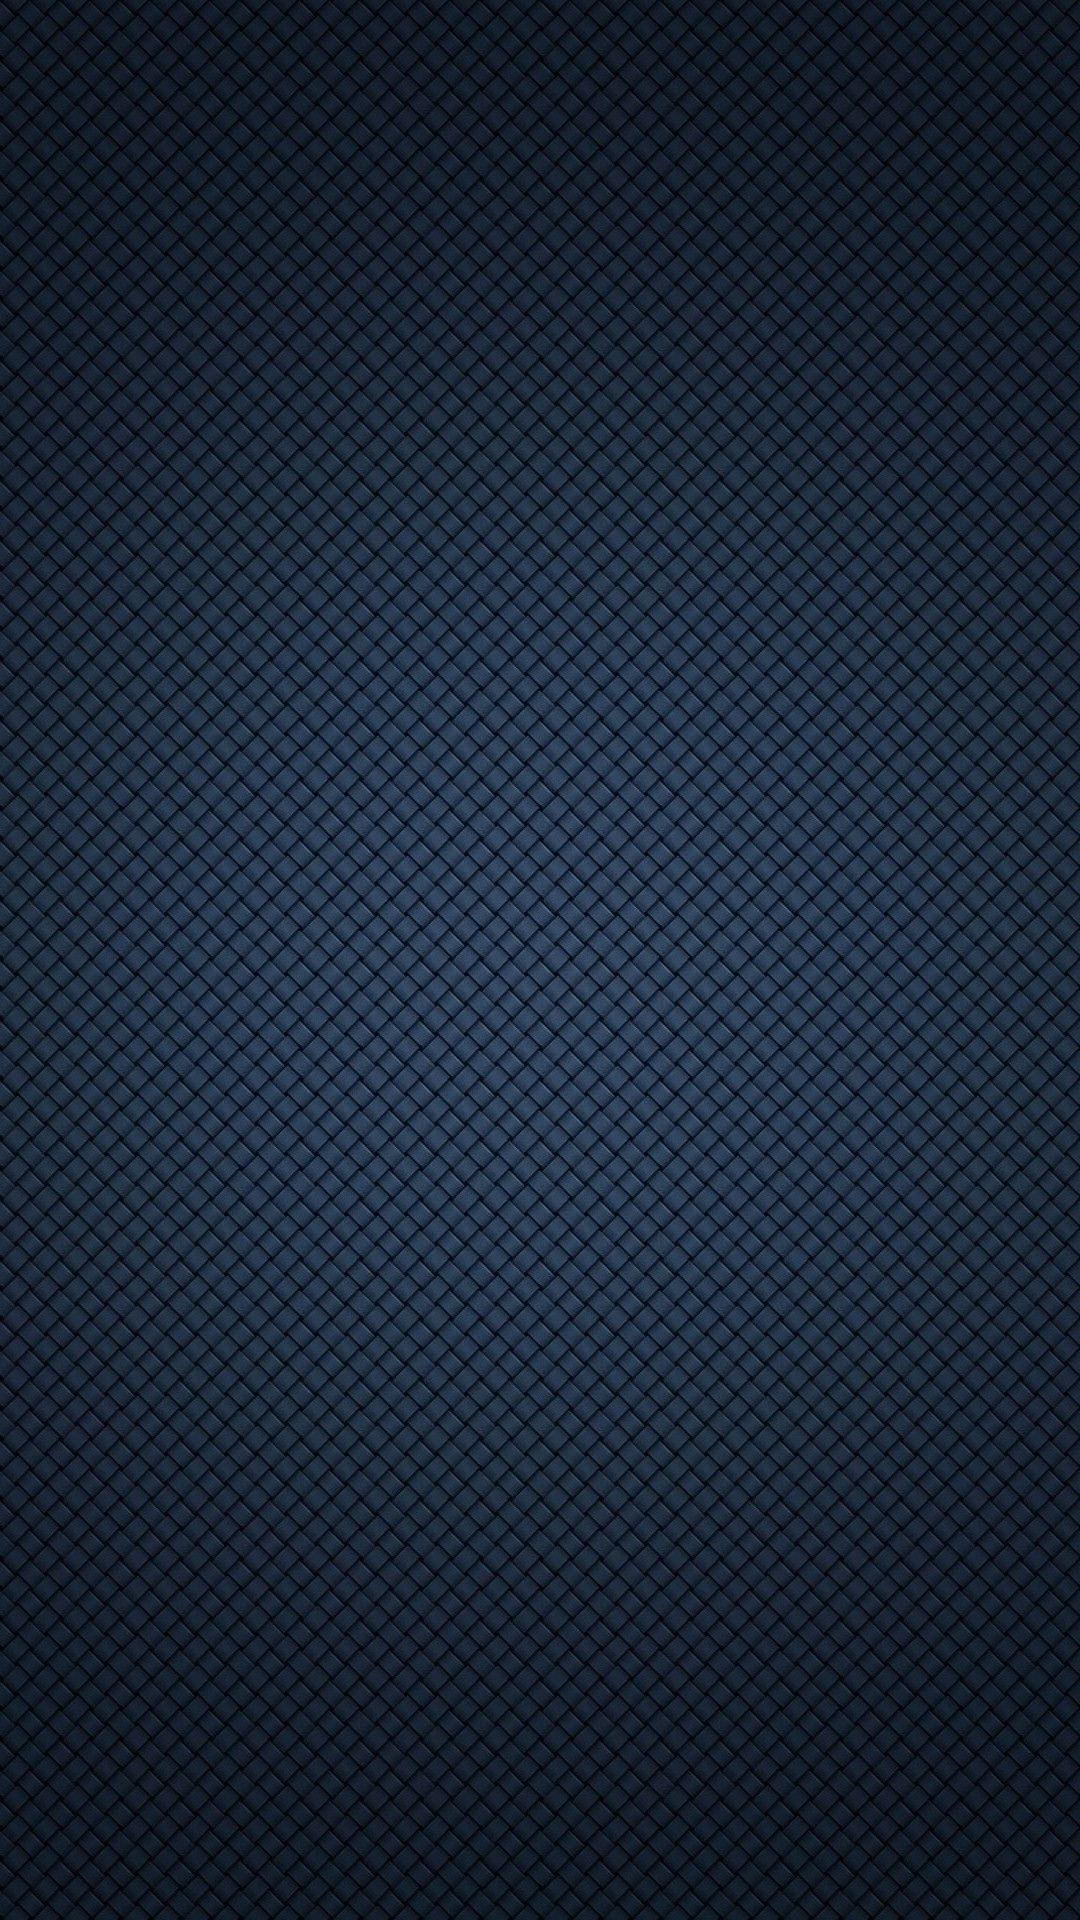 HD Black And Blue Wallpapers For Mobile - Wallpaper Cave